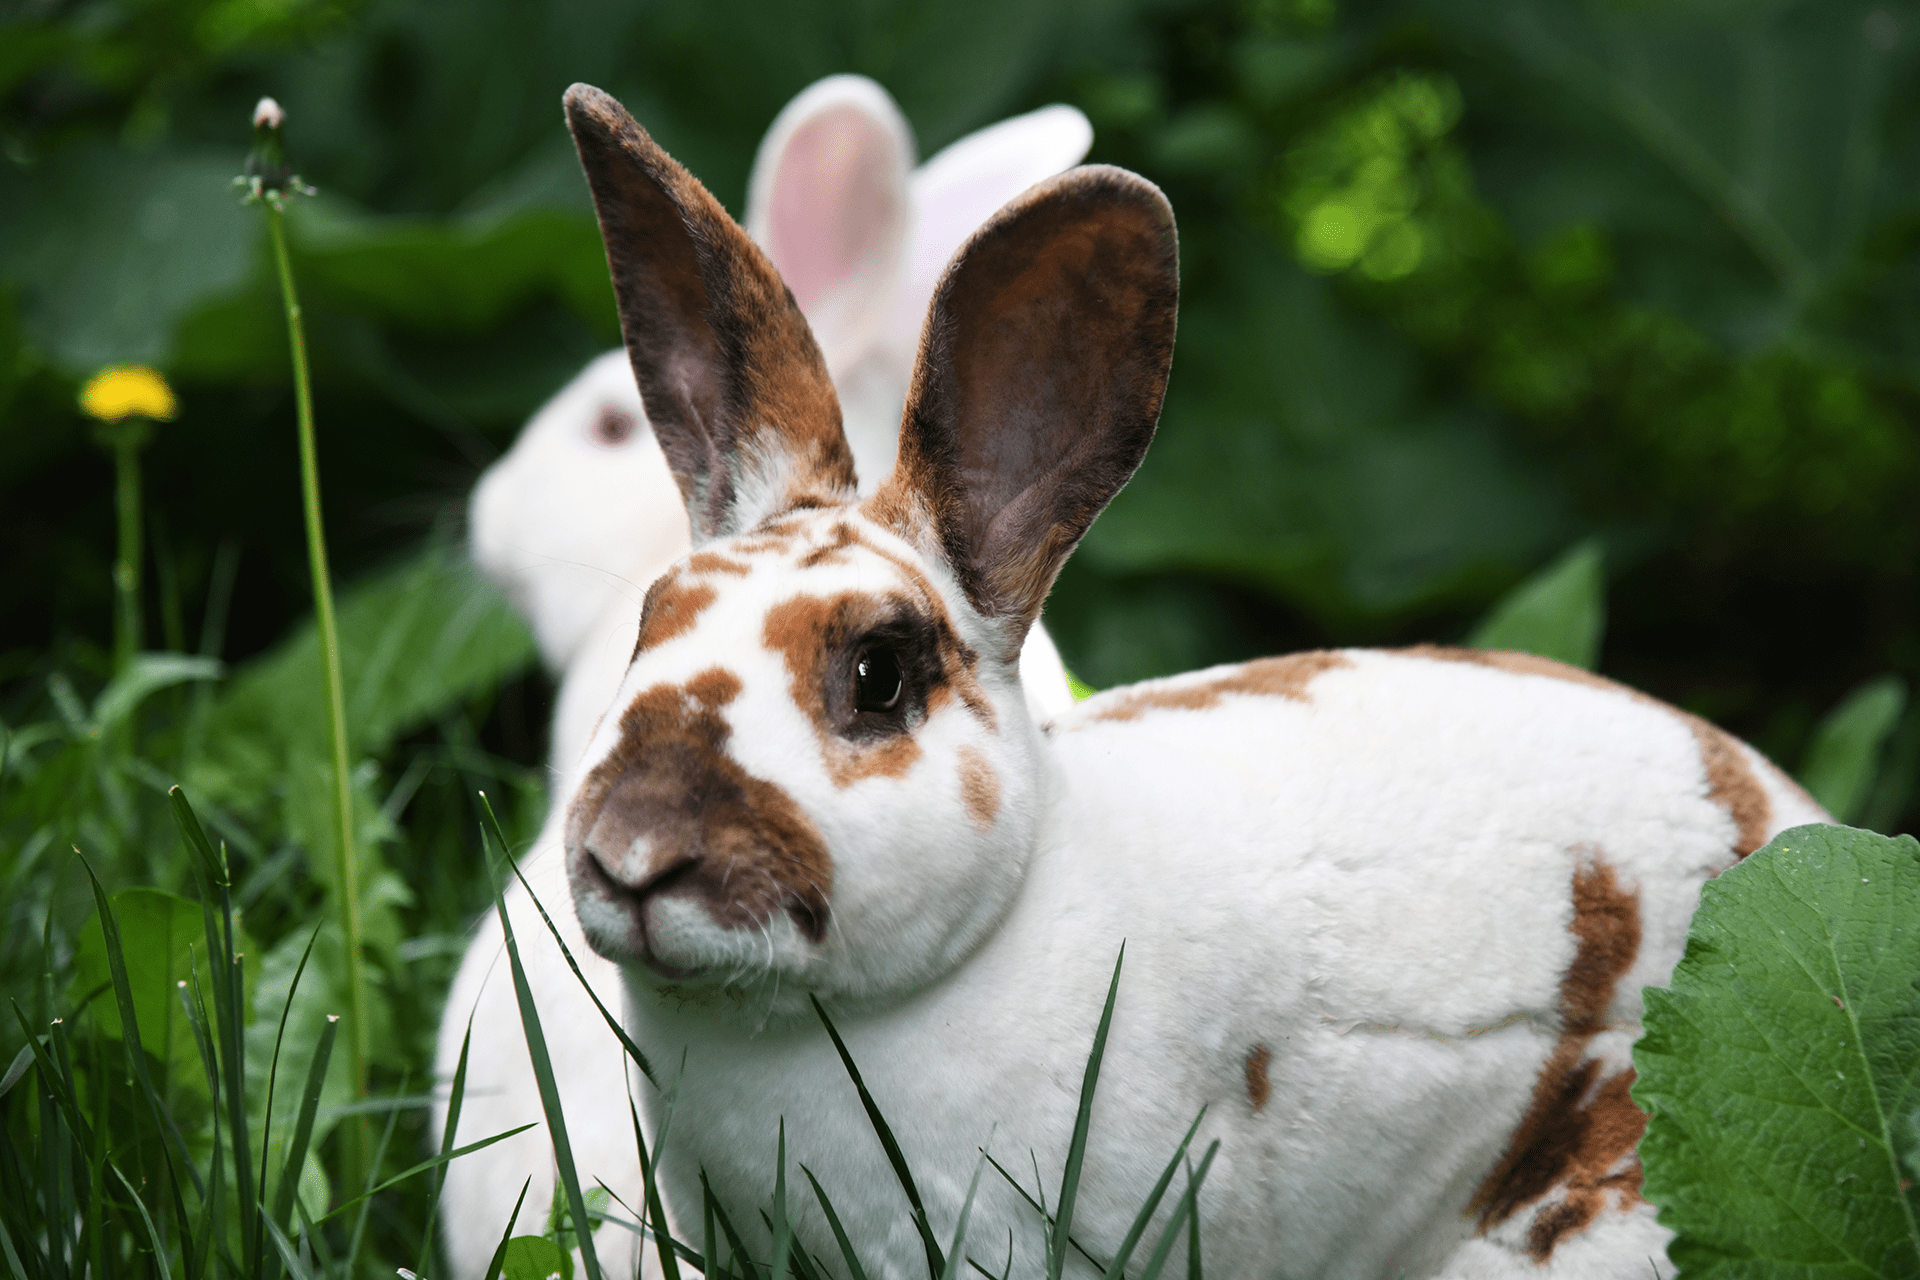 Domestic white rabbit with brown spots in front of all white rabbit sitting in foliage.